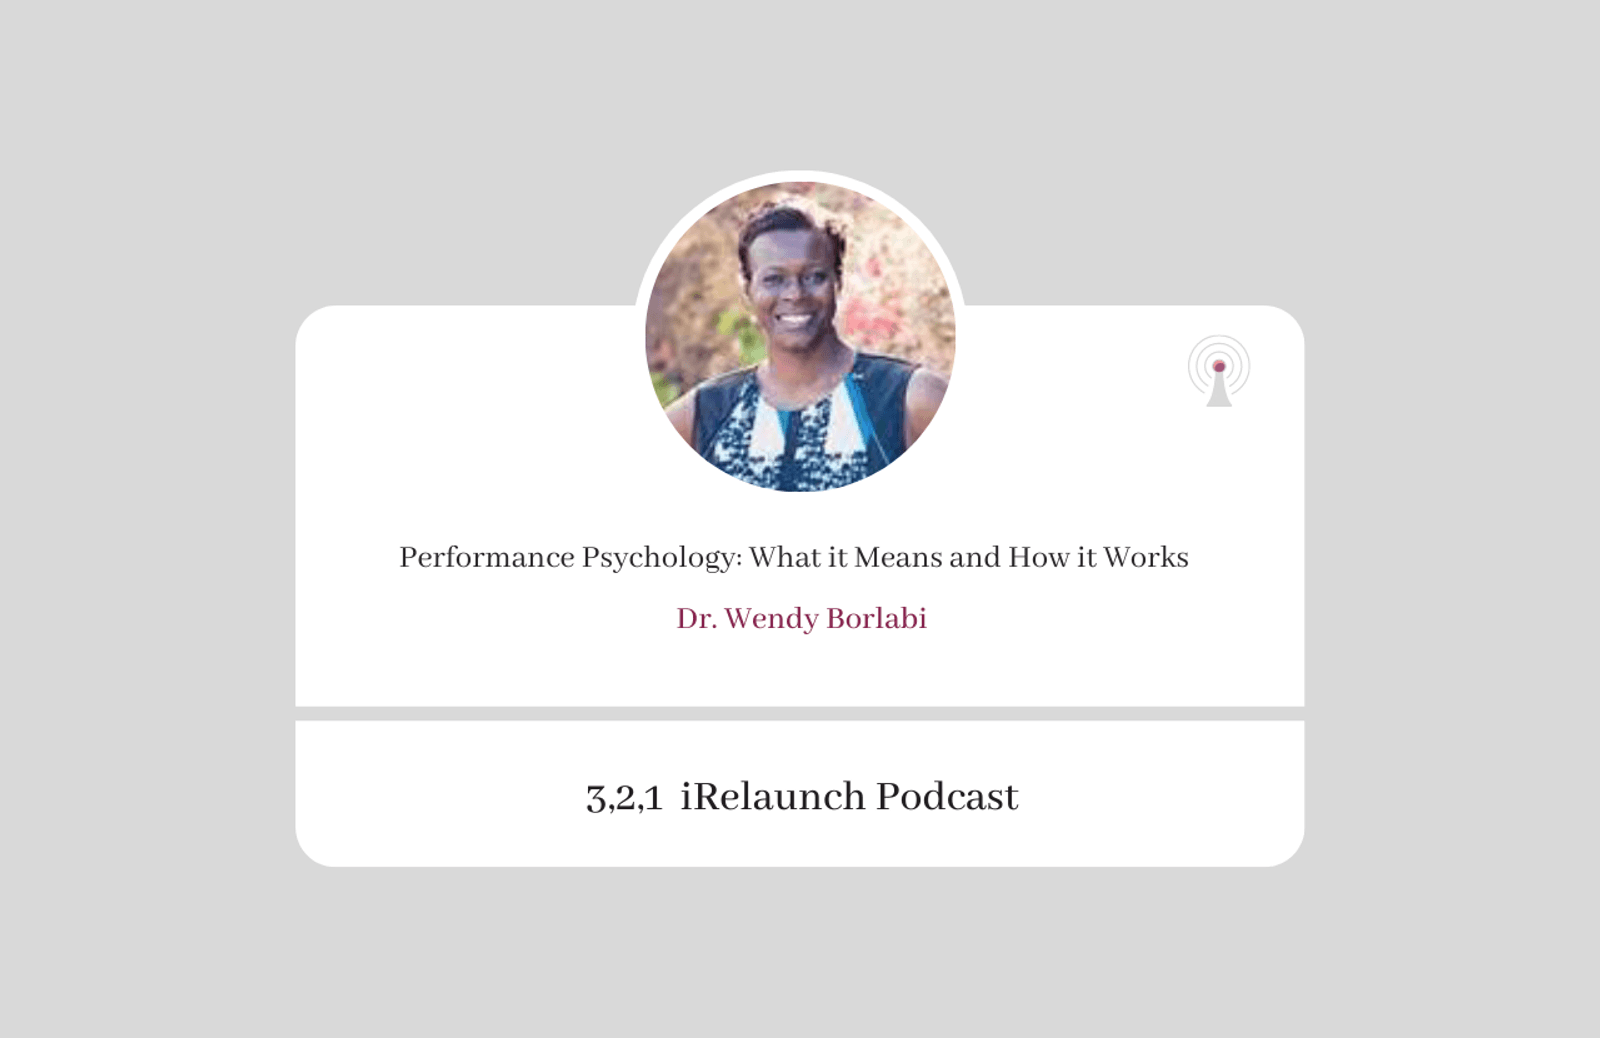 3, 2, 1 iRelaunch Podcast Thumbnail for Episode #94 with Dr. Wendy Borlabi's headshot. The episode's title is: "Performance Psychology: What it Means and How it Works."